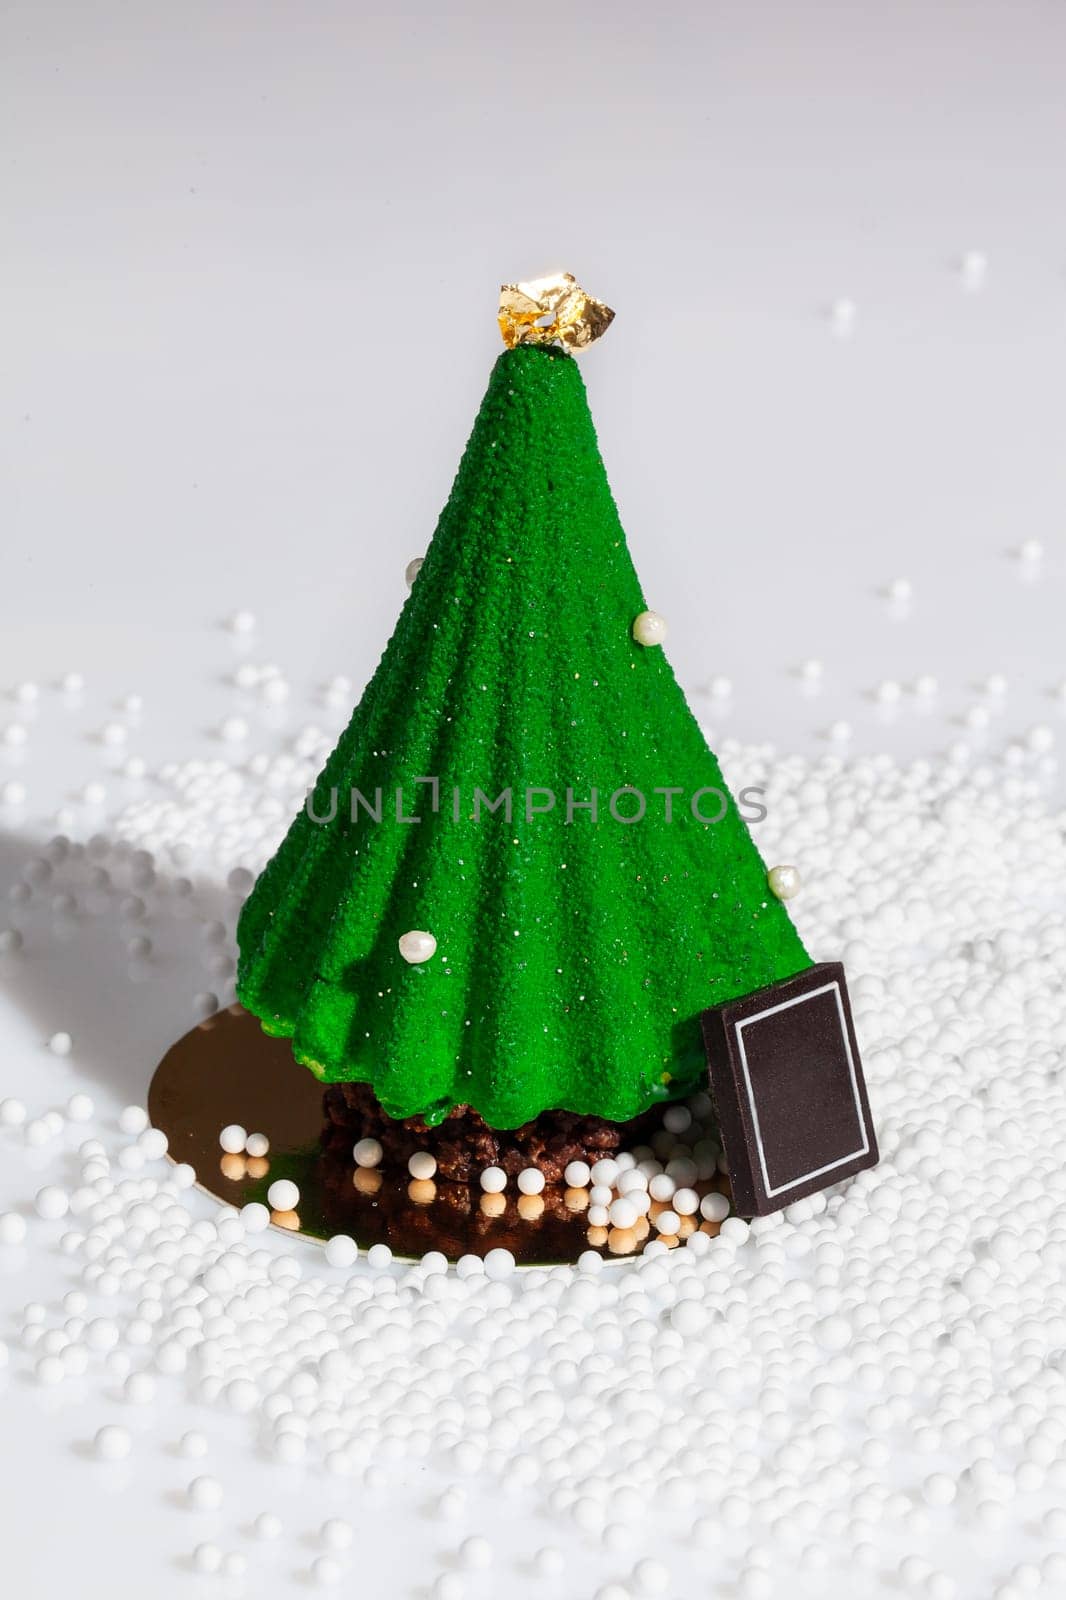 Delicious treats for New Year celebration. Handmade authors dessert in shape of green glazed Christmas tree with golden topper sprinkled with sugar beads on white background. Festive mood concept